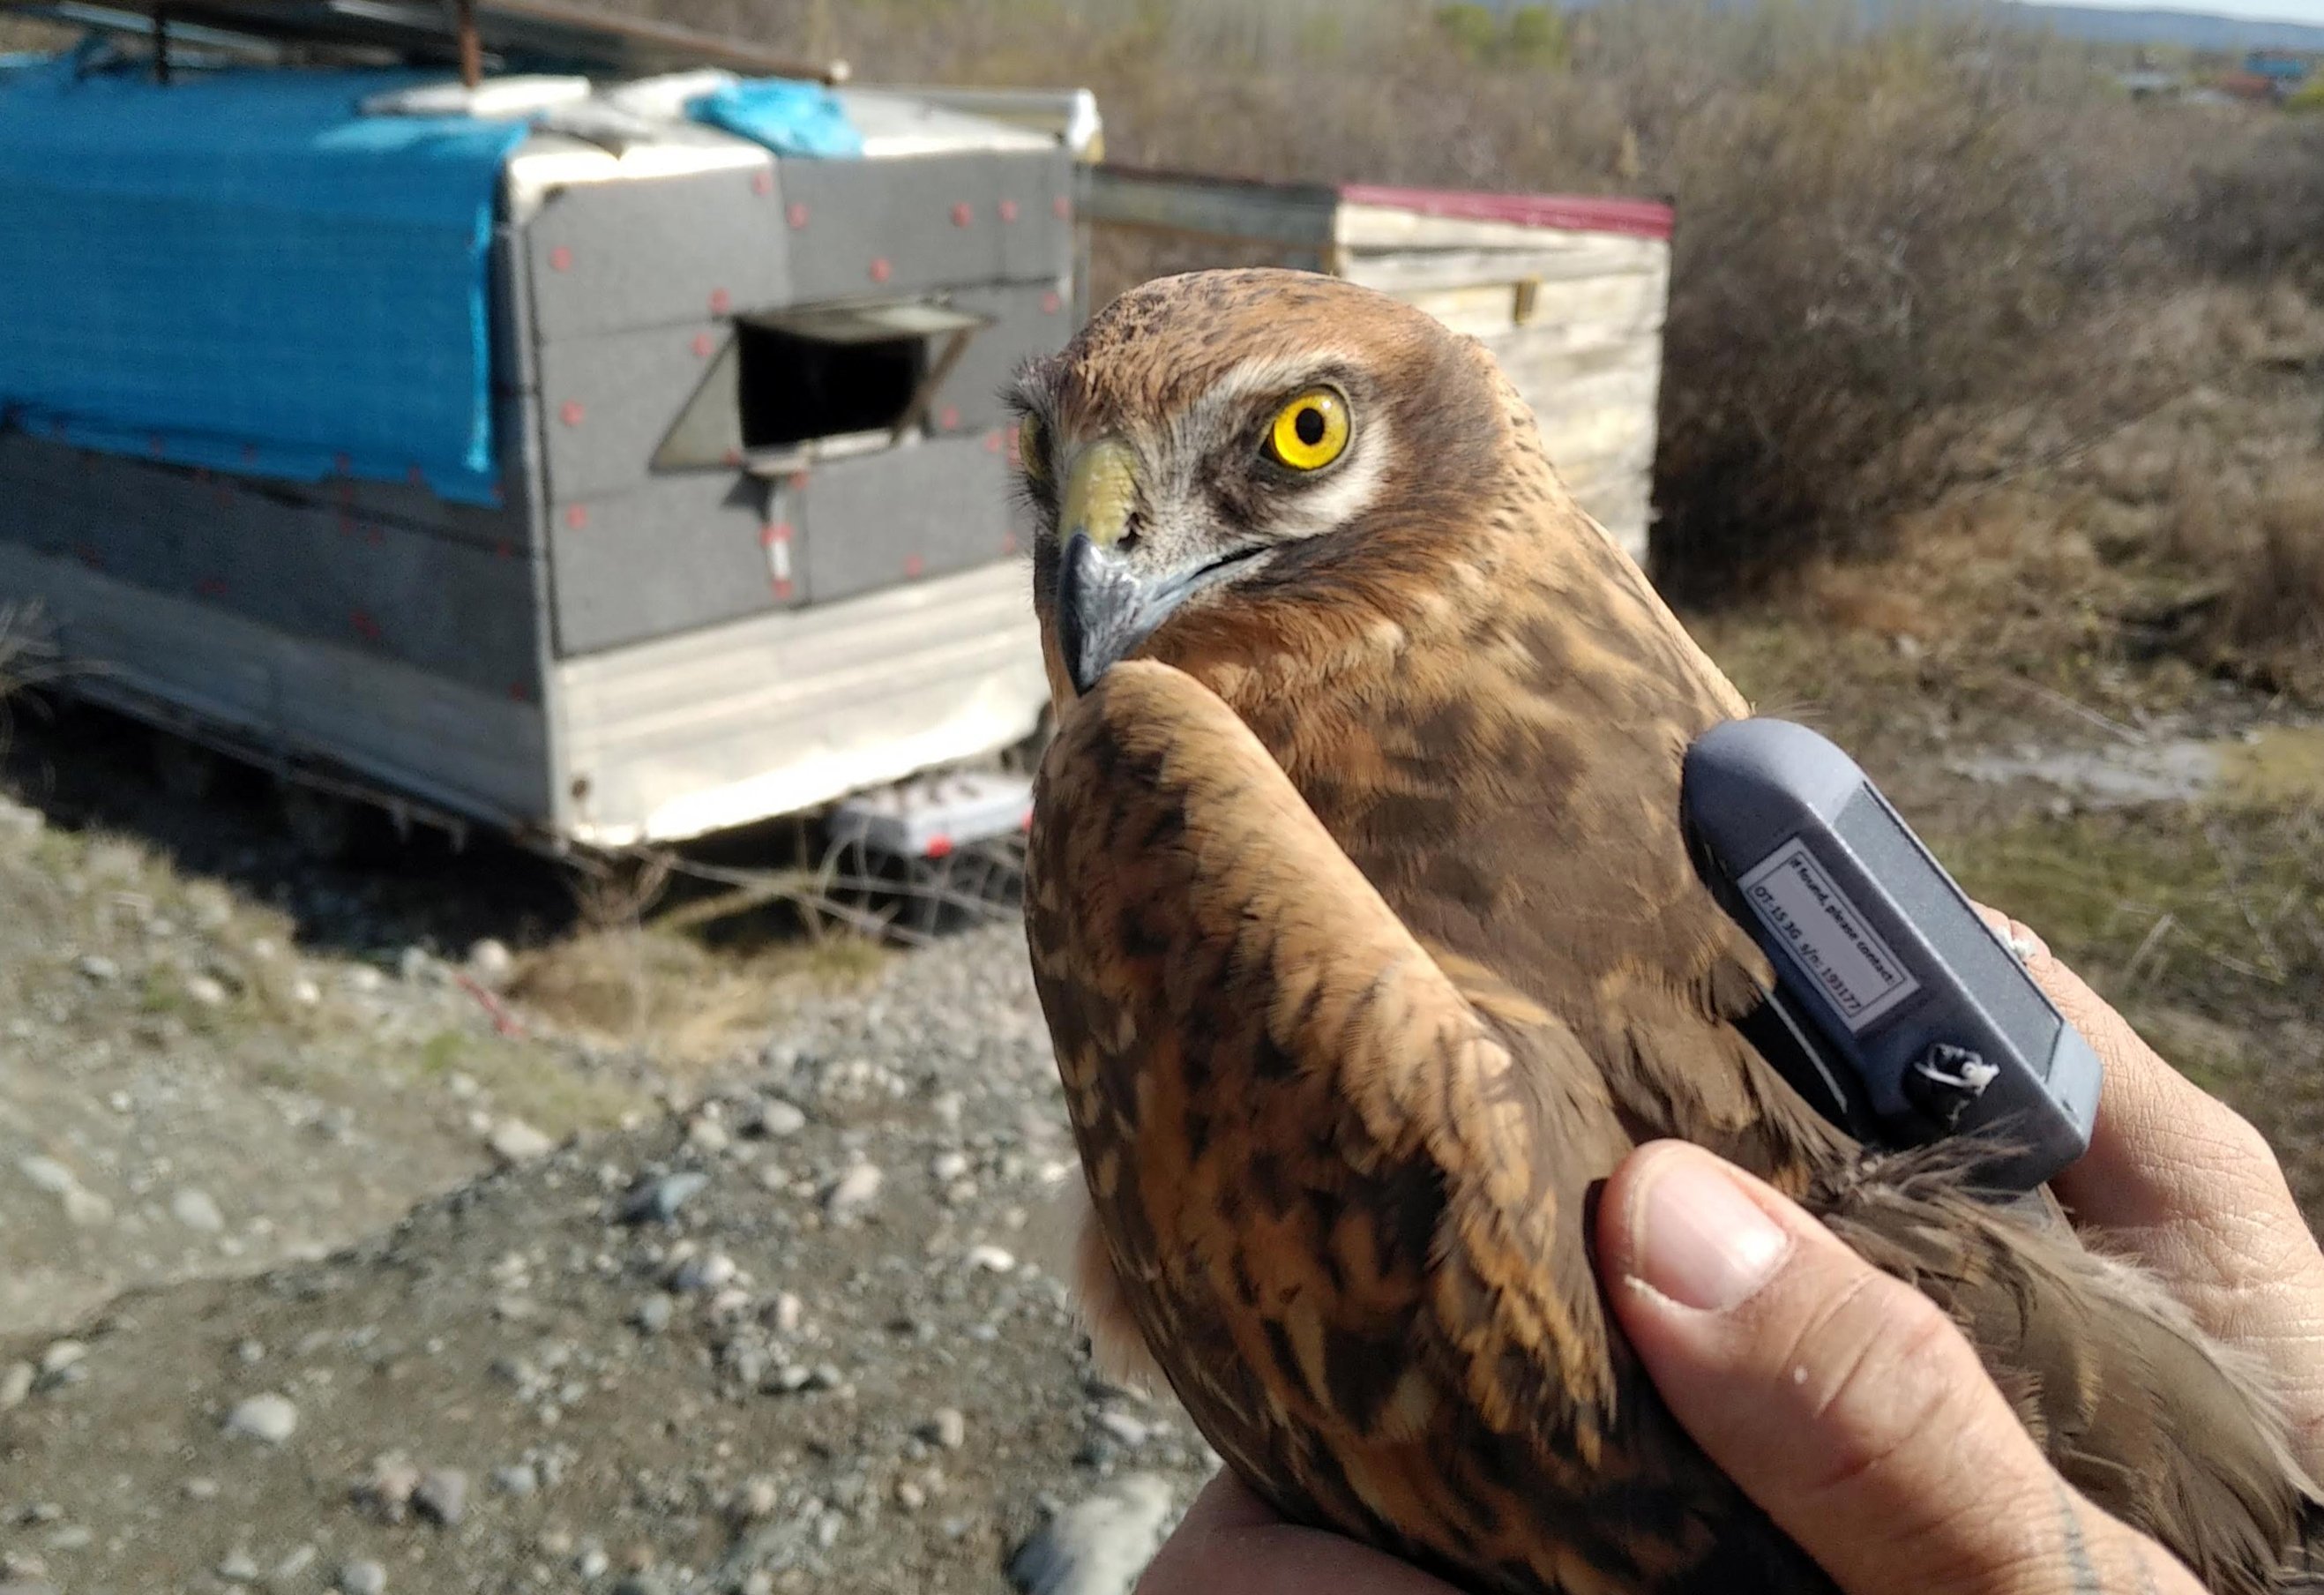 Bird's amazing journey takes it from Turkey to world over